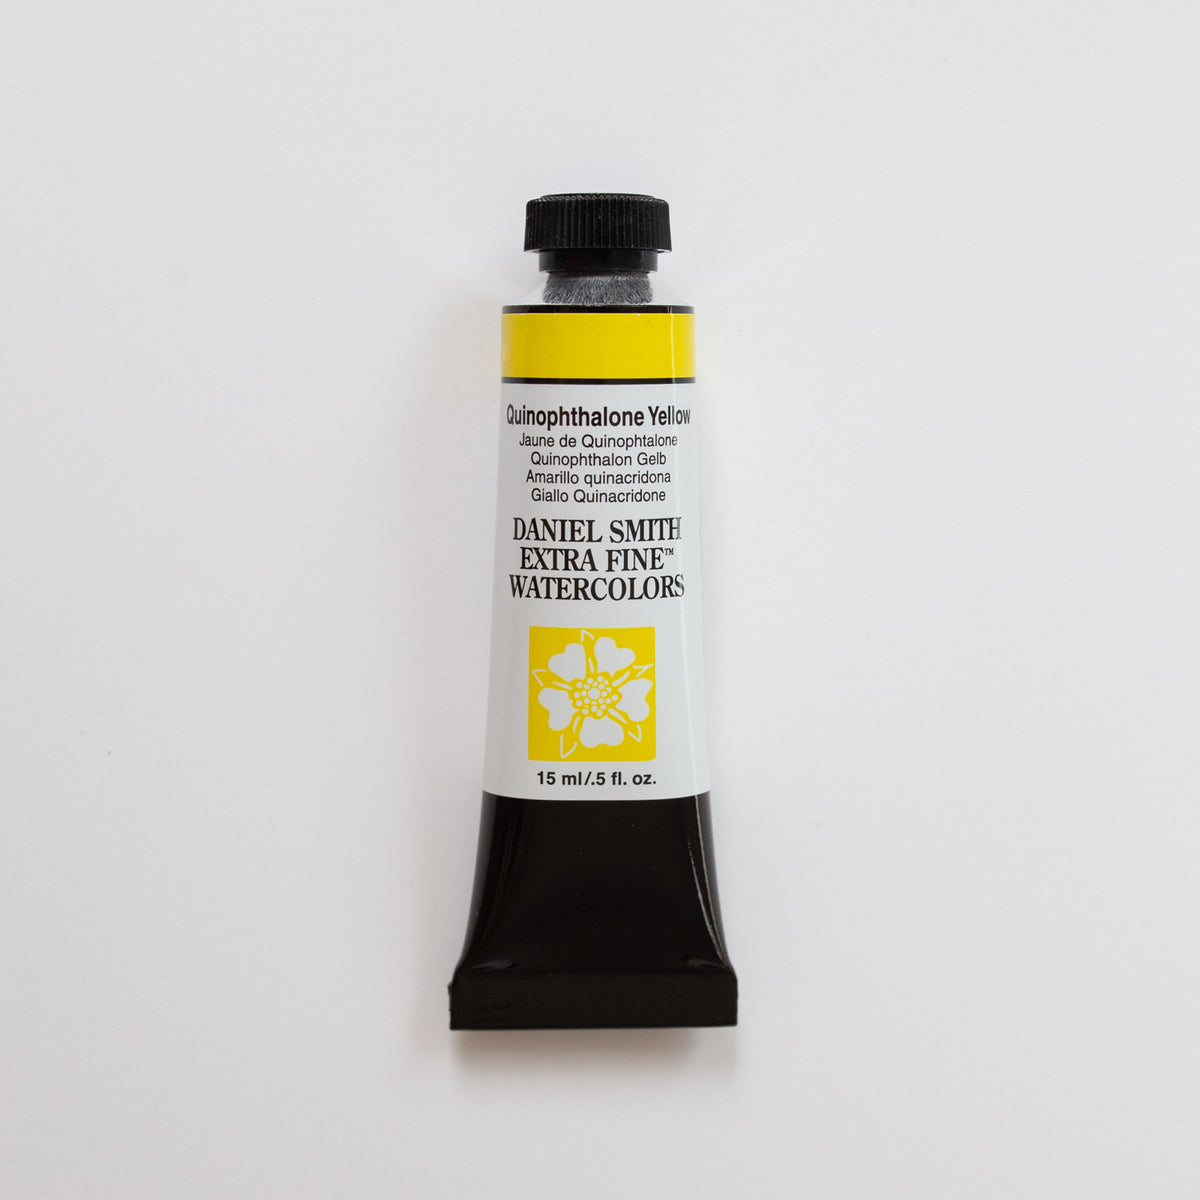 Daniel Smith Watercolor 15ml Extra Fine Quinophthalone Yellow 3